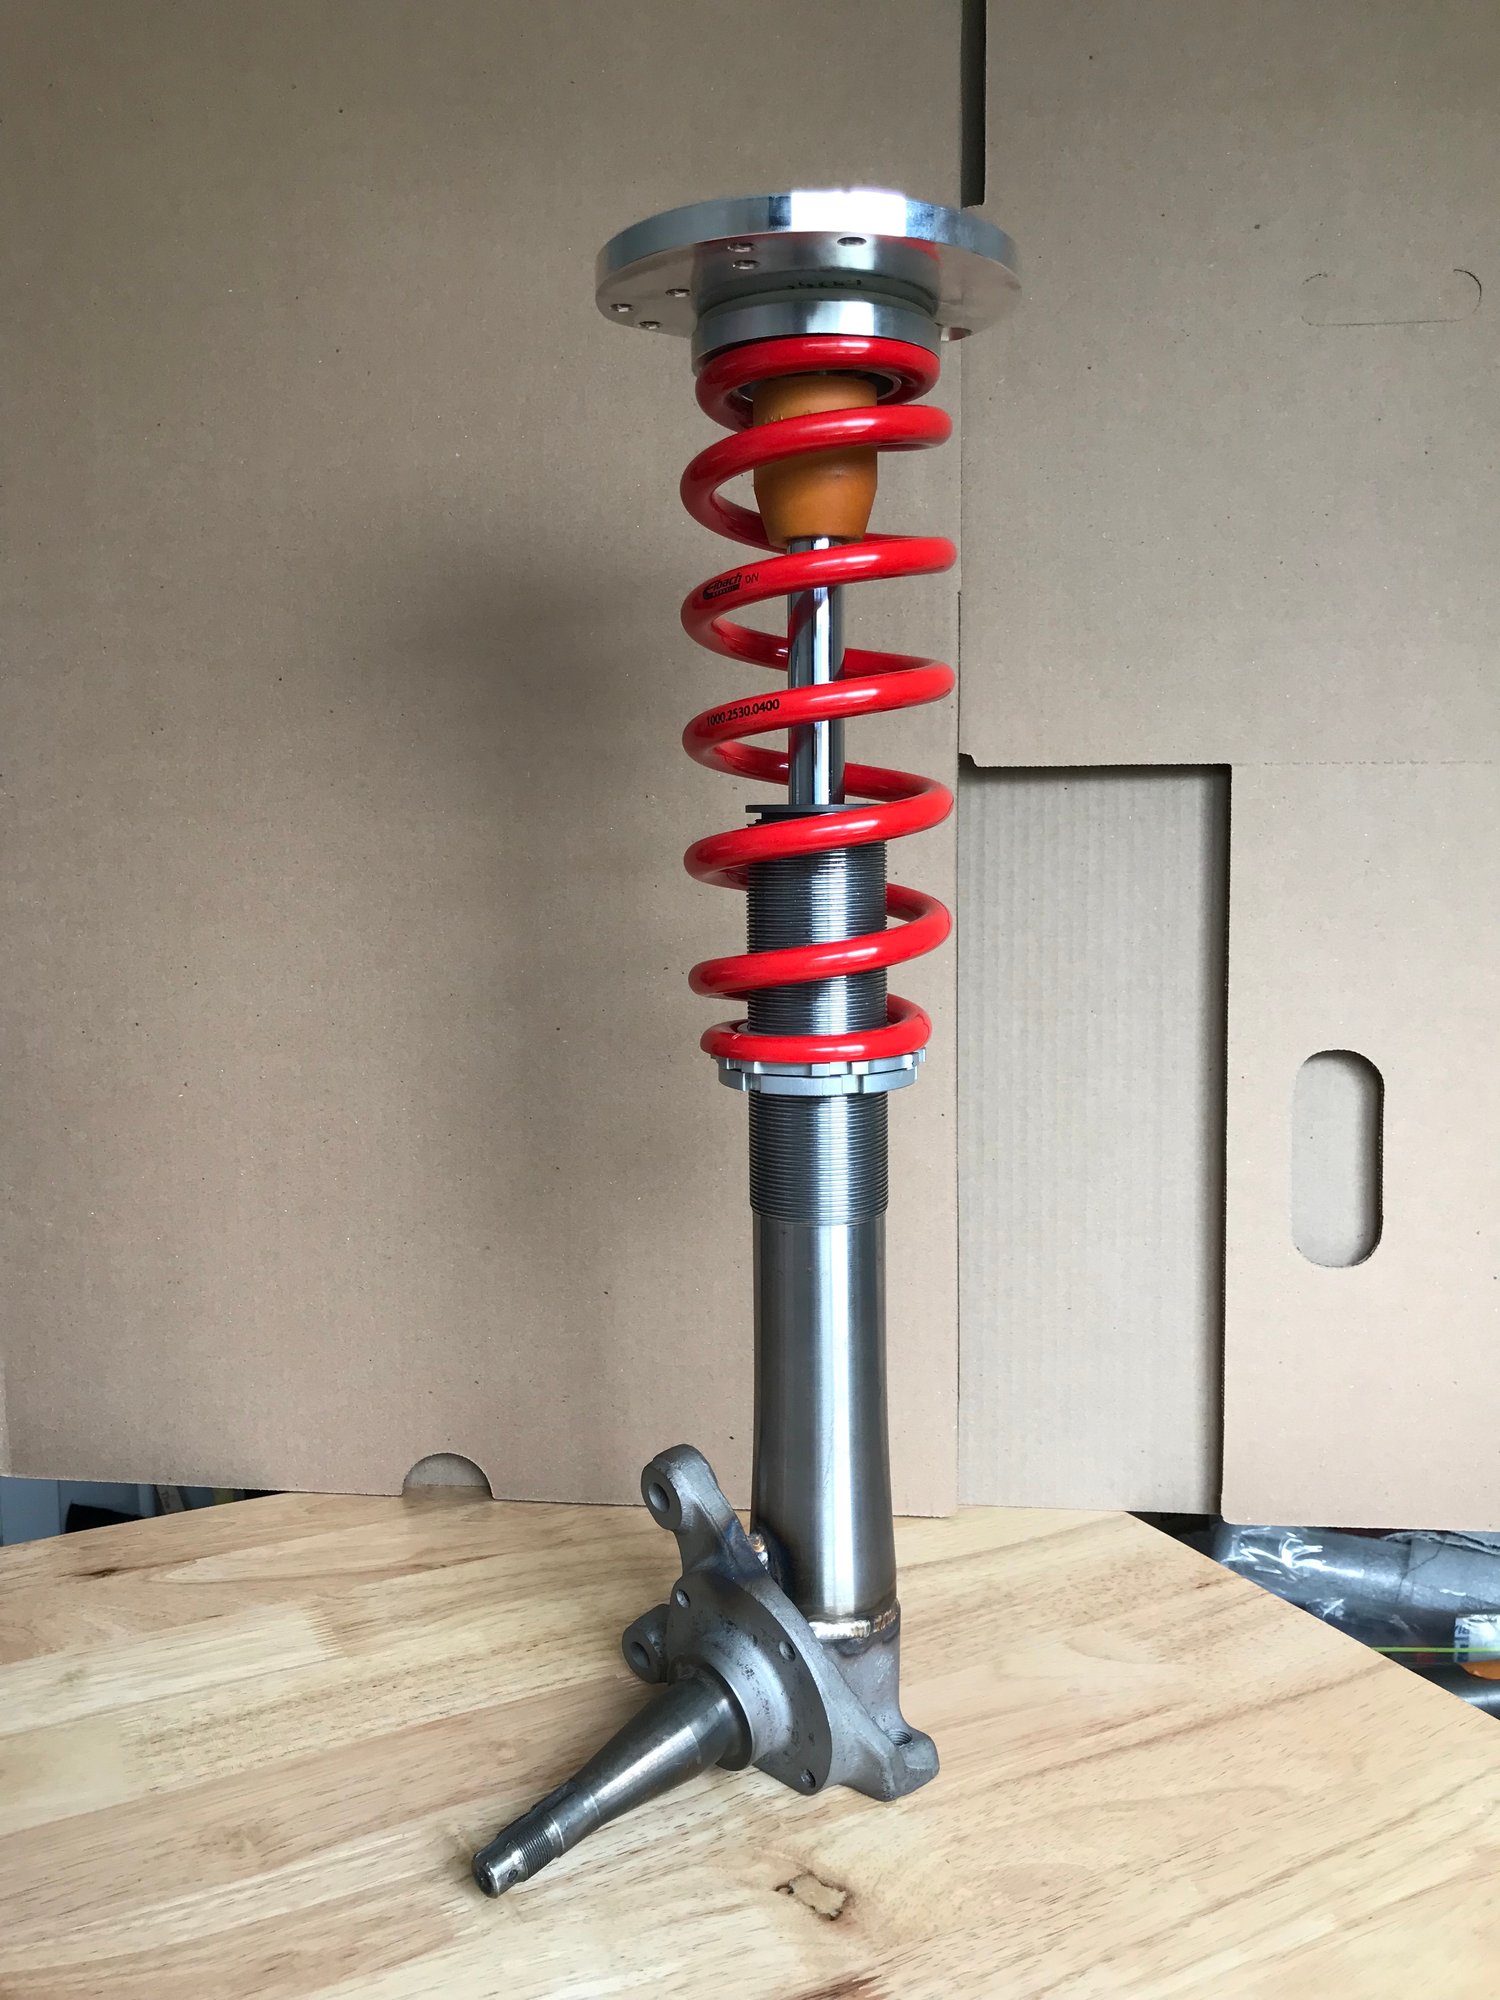 Image of Datsun 510 Coilover - 280zx Spindle - Koni Sport Inserts & Hyperco Springs